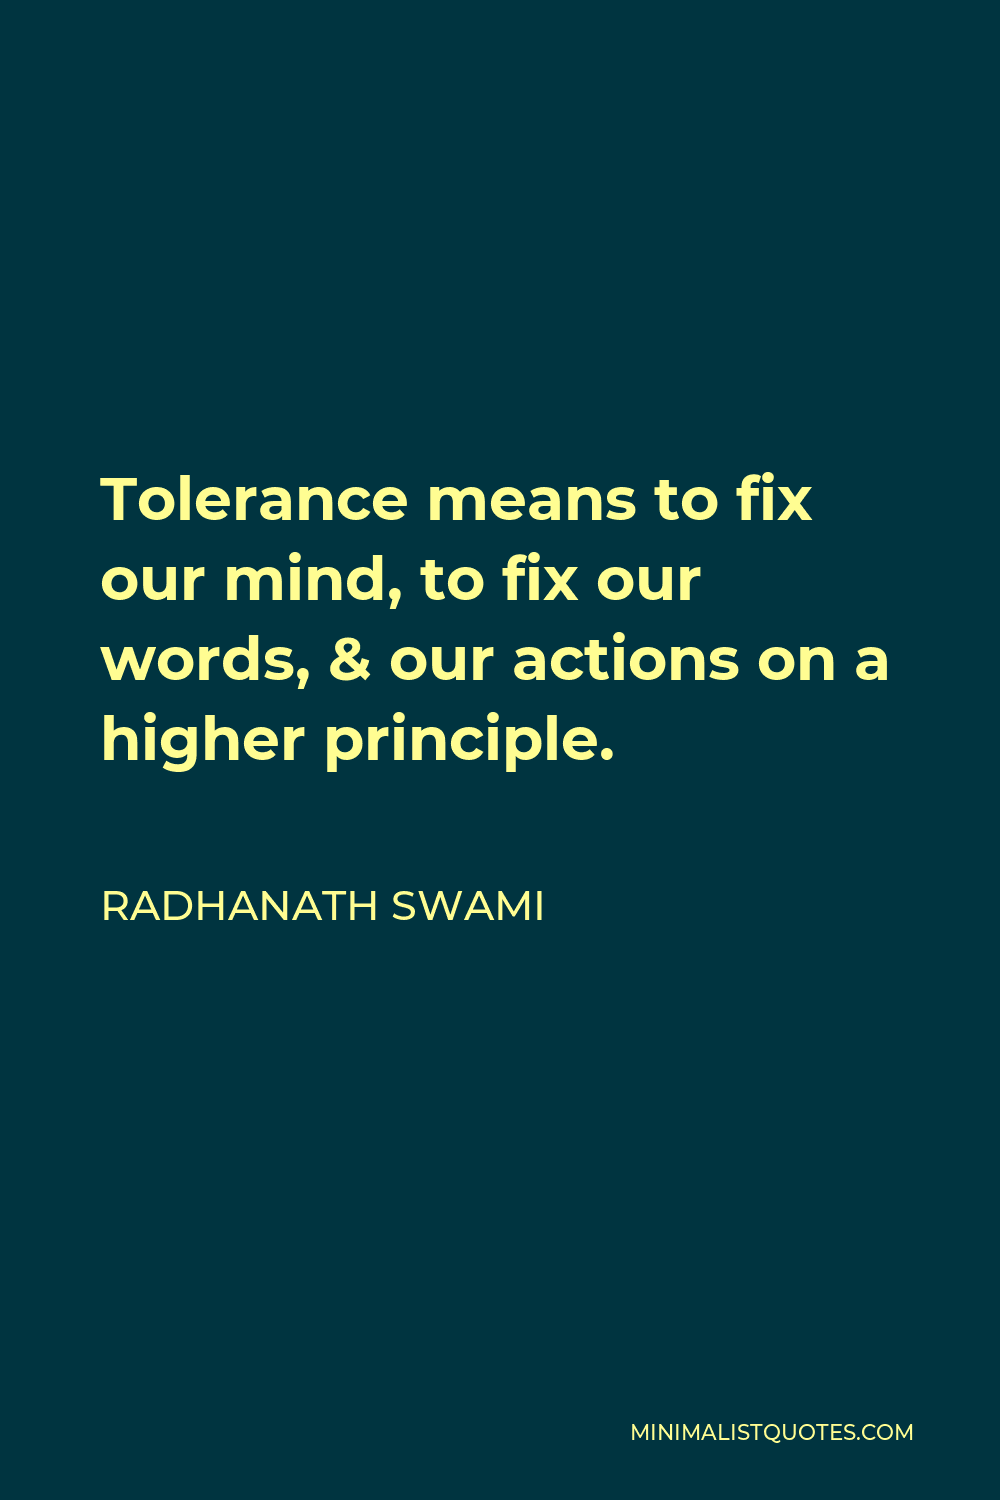 Radhanath Swami Quote - Tolerance means to fix our mind, to fix our words, & our actions on a higher principle.